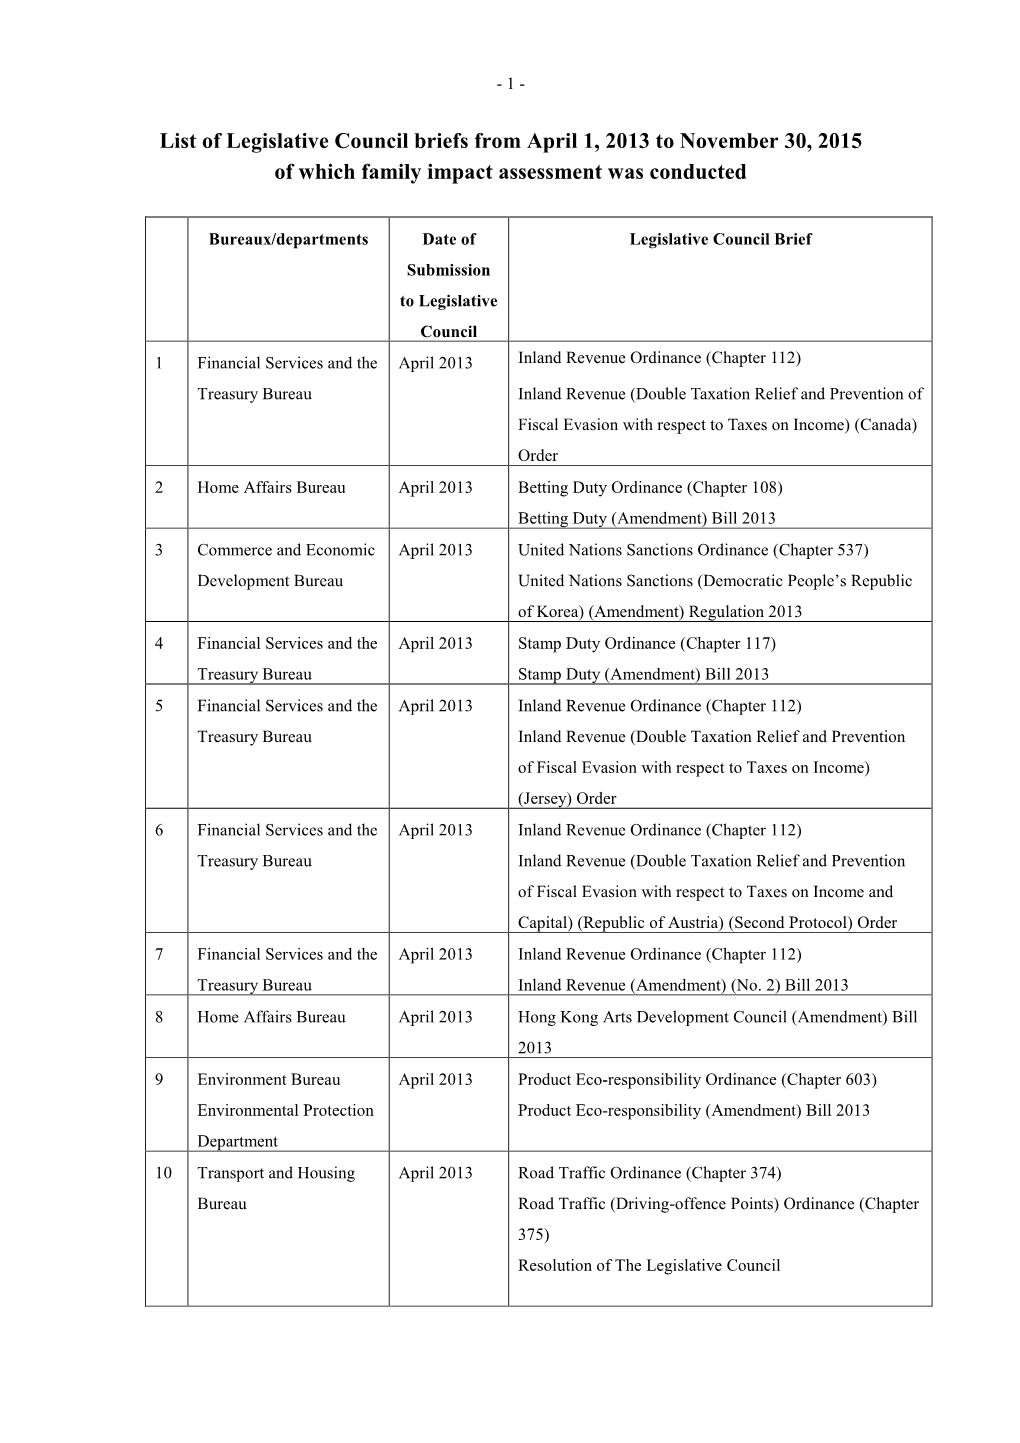 List of Legislative Council Briefs from April 1, 2013 to November 30, 2015 of Which Family Impact Assessment Was Conducted